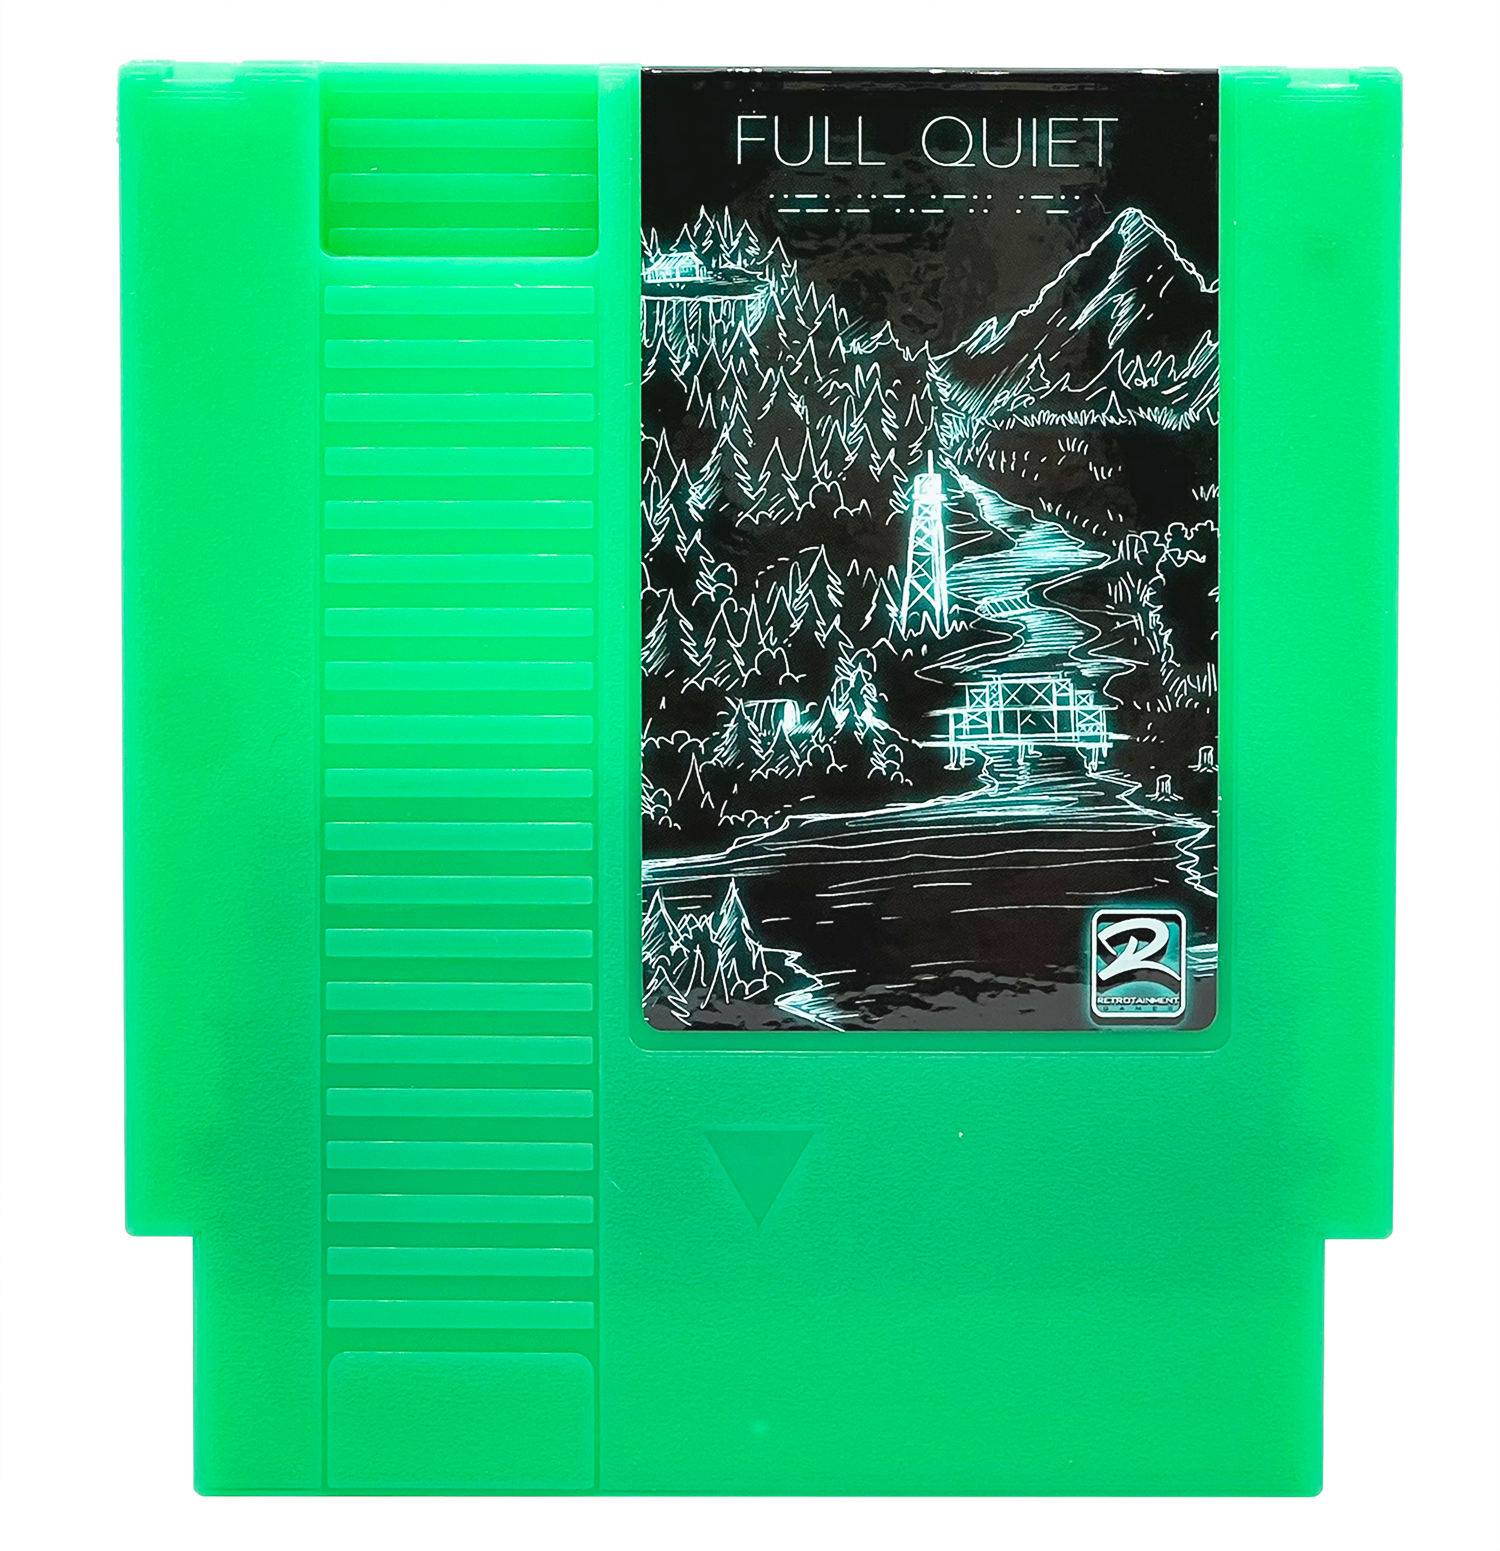 Full Quiet (Regular Edition) NES Game (Green Glow Cartridge Only) Shipping Soon!